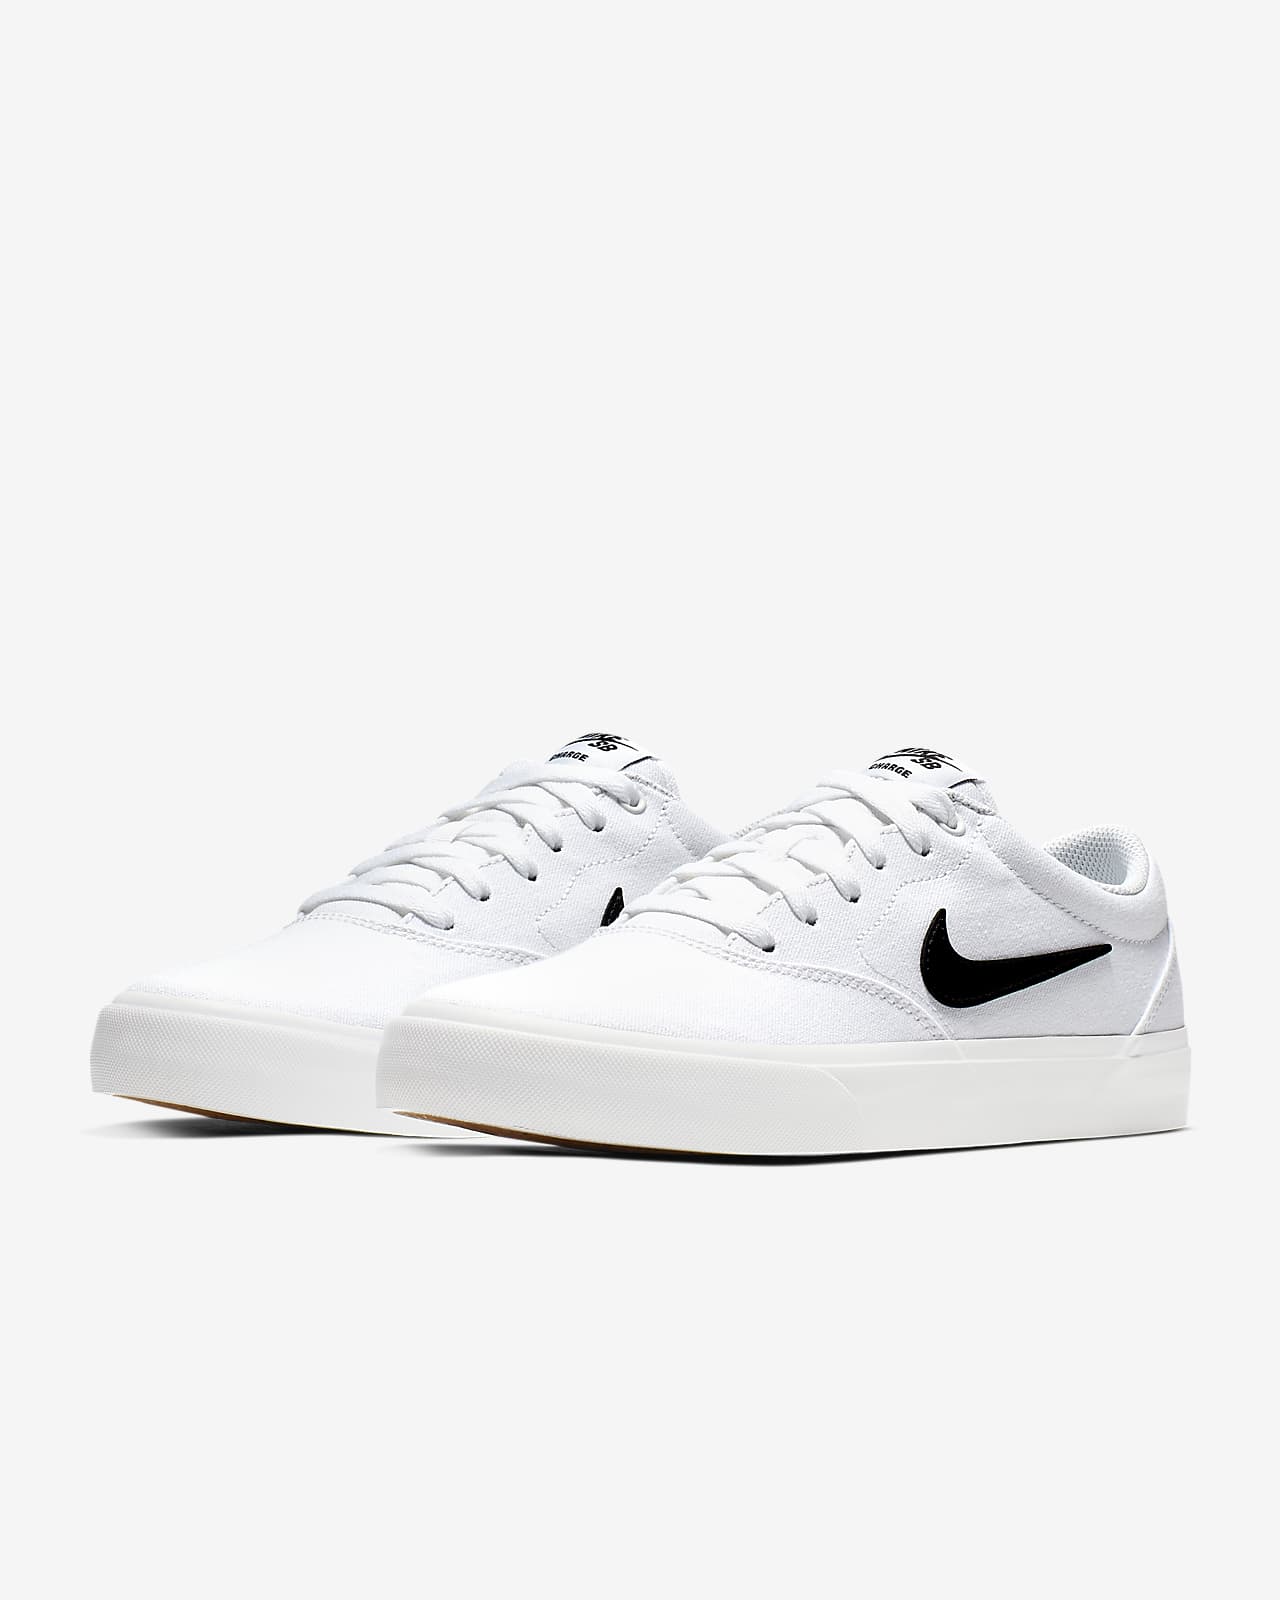 nike sb charge canvas men's shoes